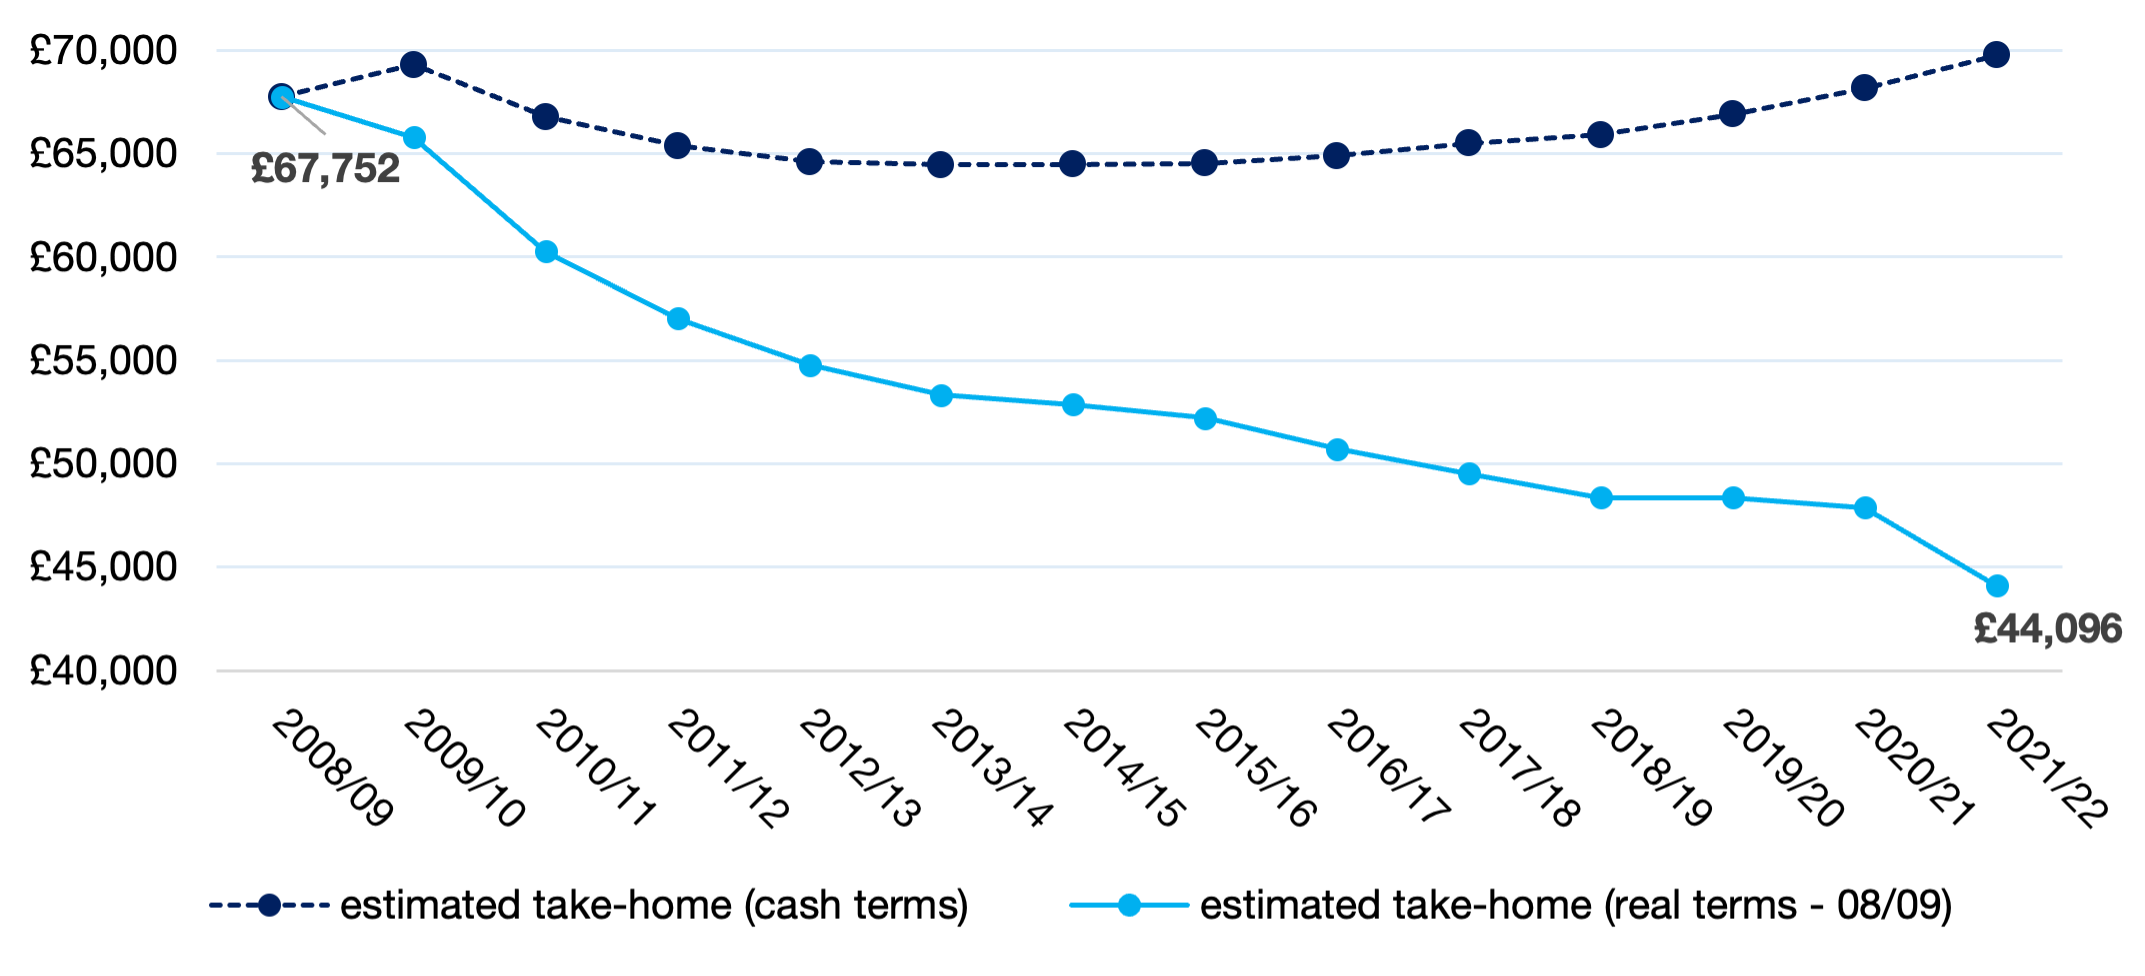 Real decline in value of estimated take-home pay for average consultant (England) using RPI (Source: BMA analysis of NHS Digital’s NHS Staff Earnings Estimates)